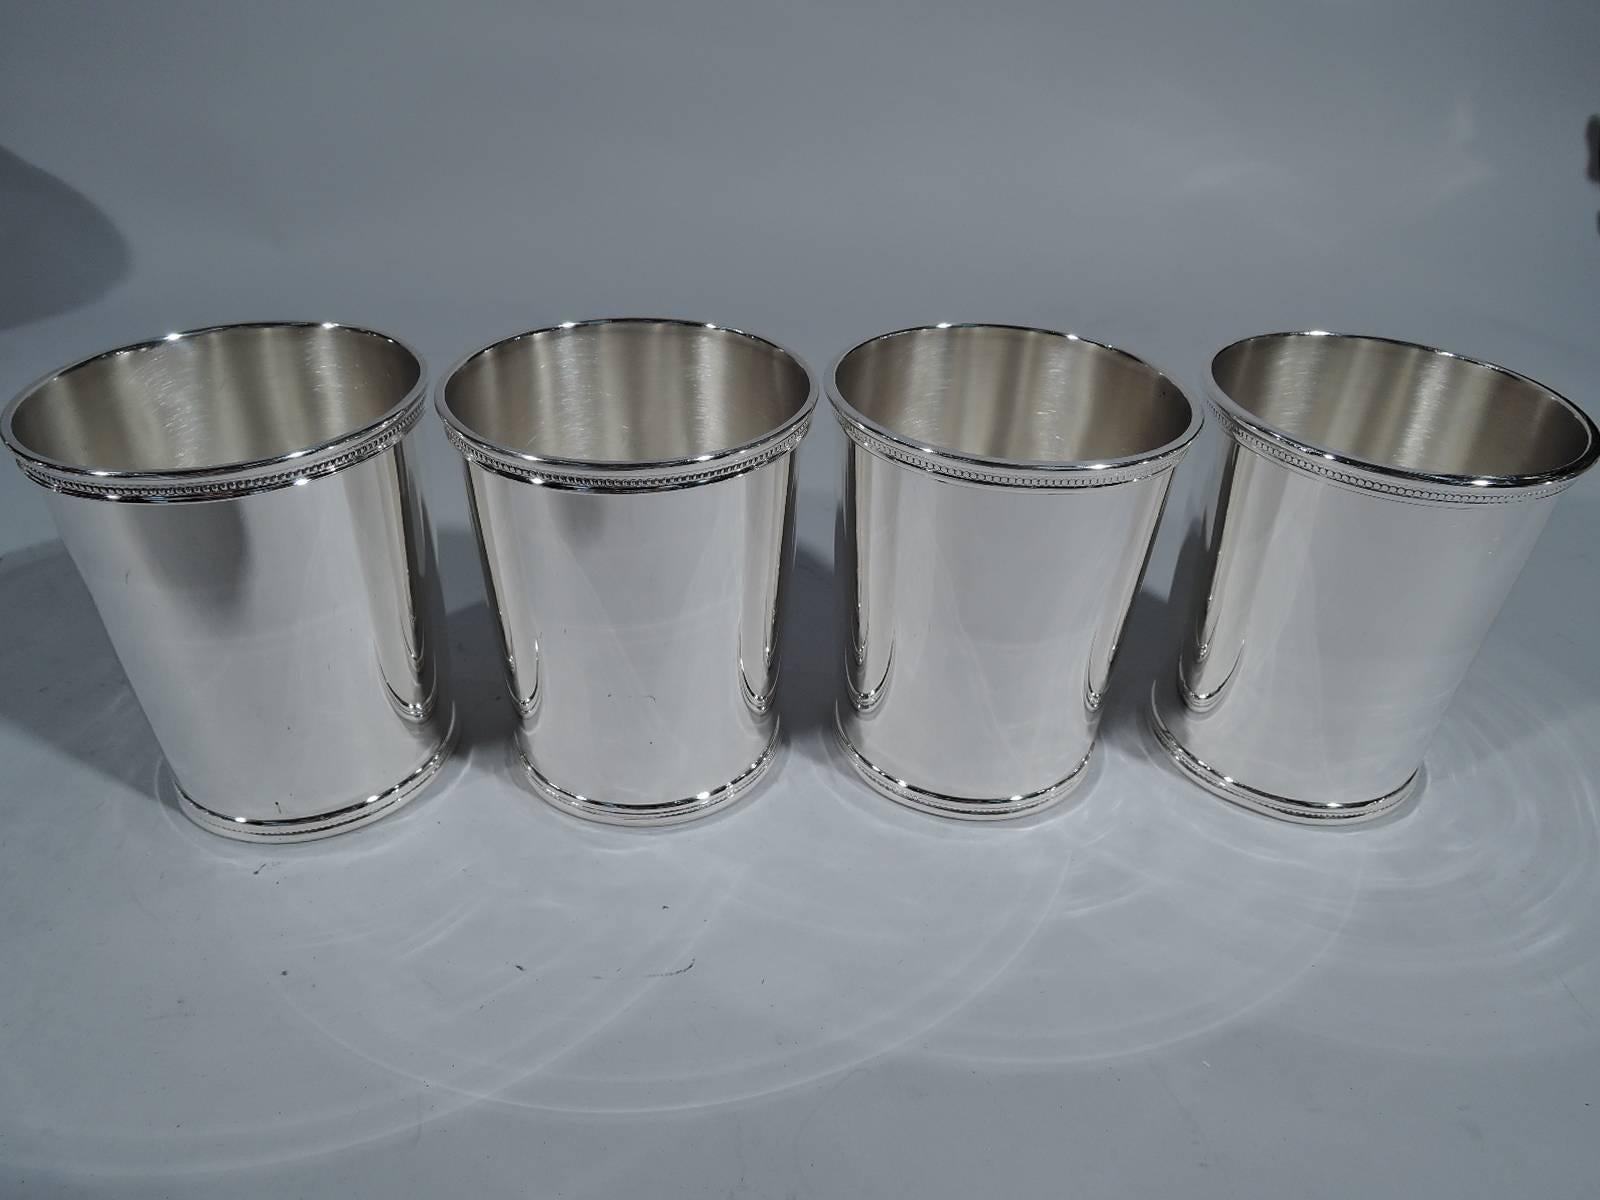 Set of 4 Eisenhower-era sterling silver mint julep cups. Made by Scearce in Shelbyville, Kentucky, 1953-1961. Each: straight and tapering sides and beaded and molded rims. A great set for Derby day or after a round of golf. Hallmark includes date